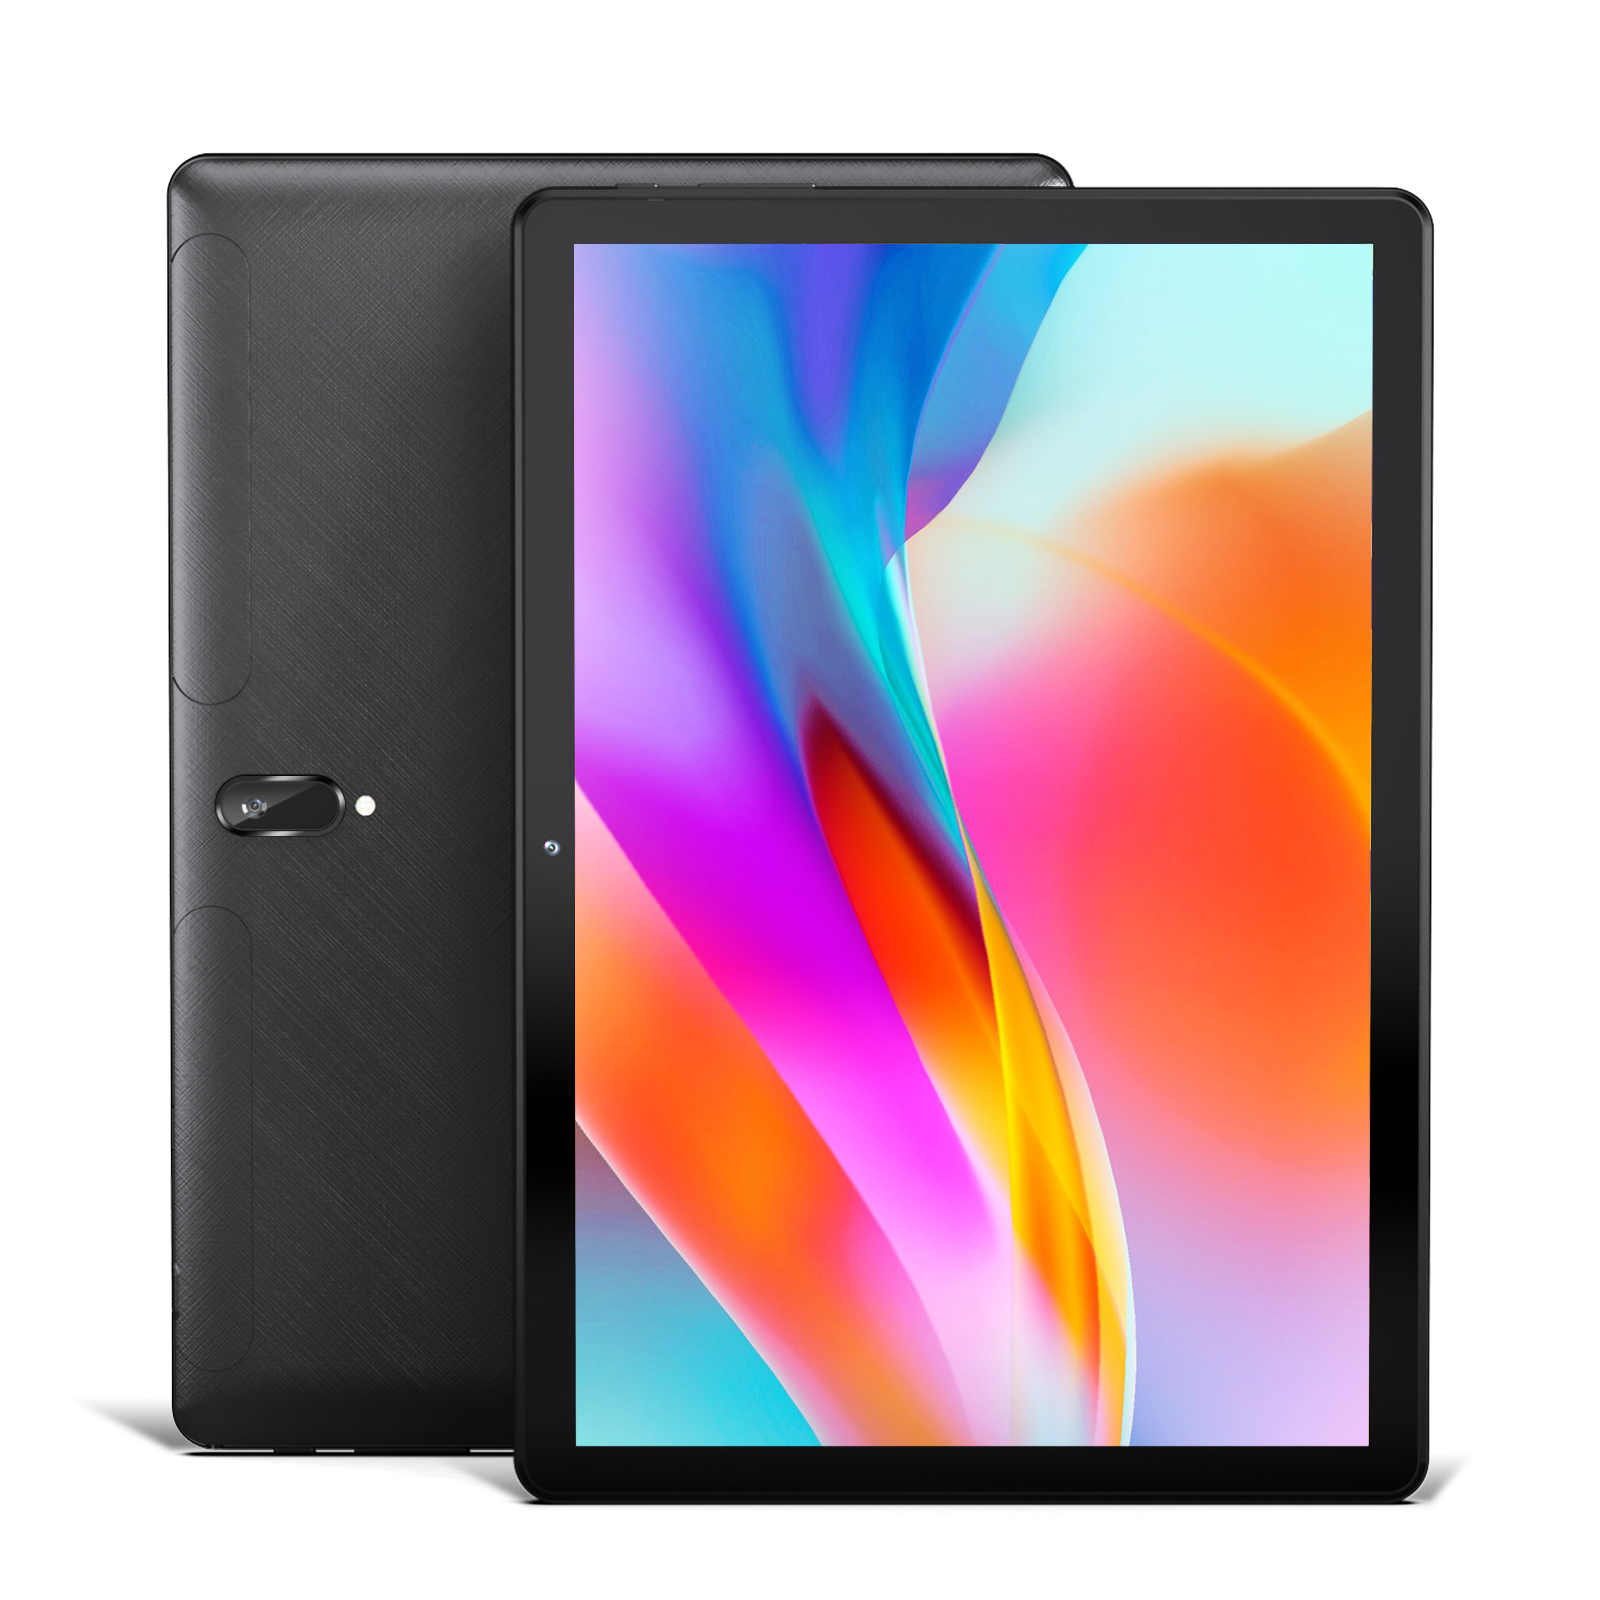 MAGCH X10 10 inch Android Tablet, 3G Phone Tablet with Dual SIM Android 10.0, 32GB ROM, 2GB RAM, HD IPS Display, Quad-Core Processor, Wi-Fi, Bluetooth 4.2, GPS, FM, OTG, USB Type-C Charging, Black